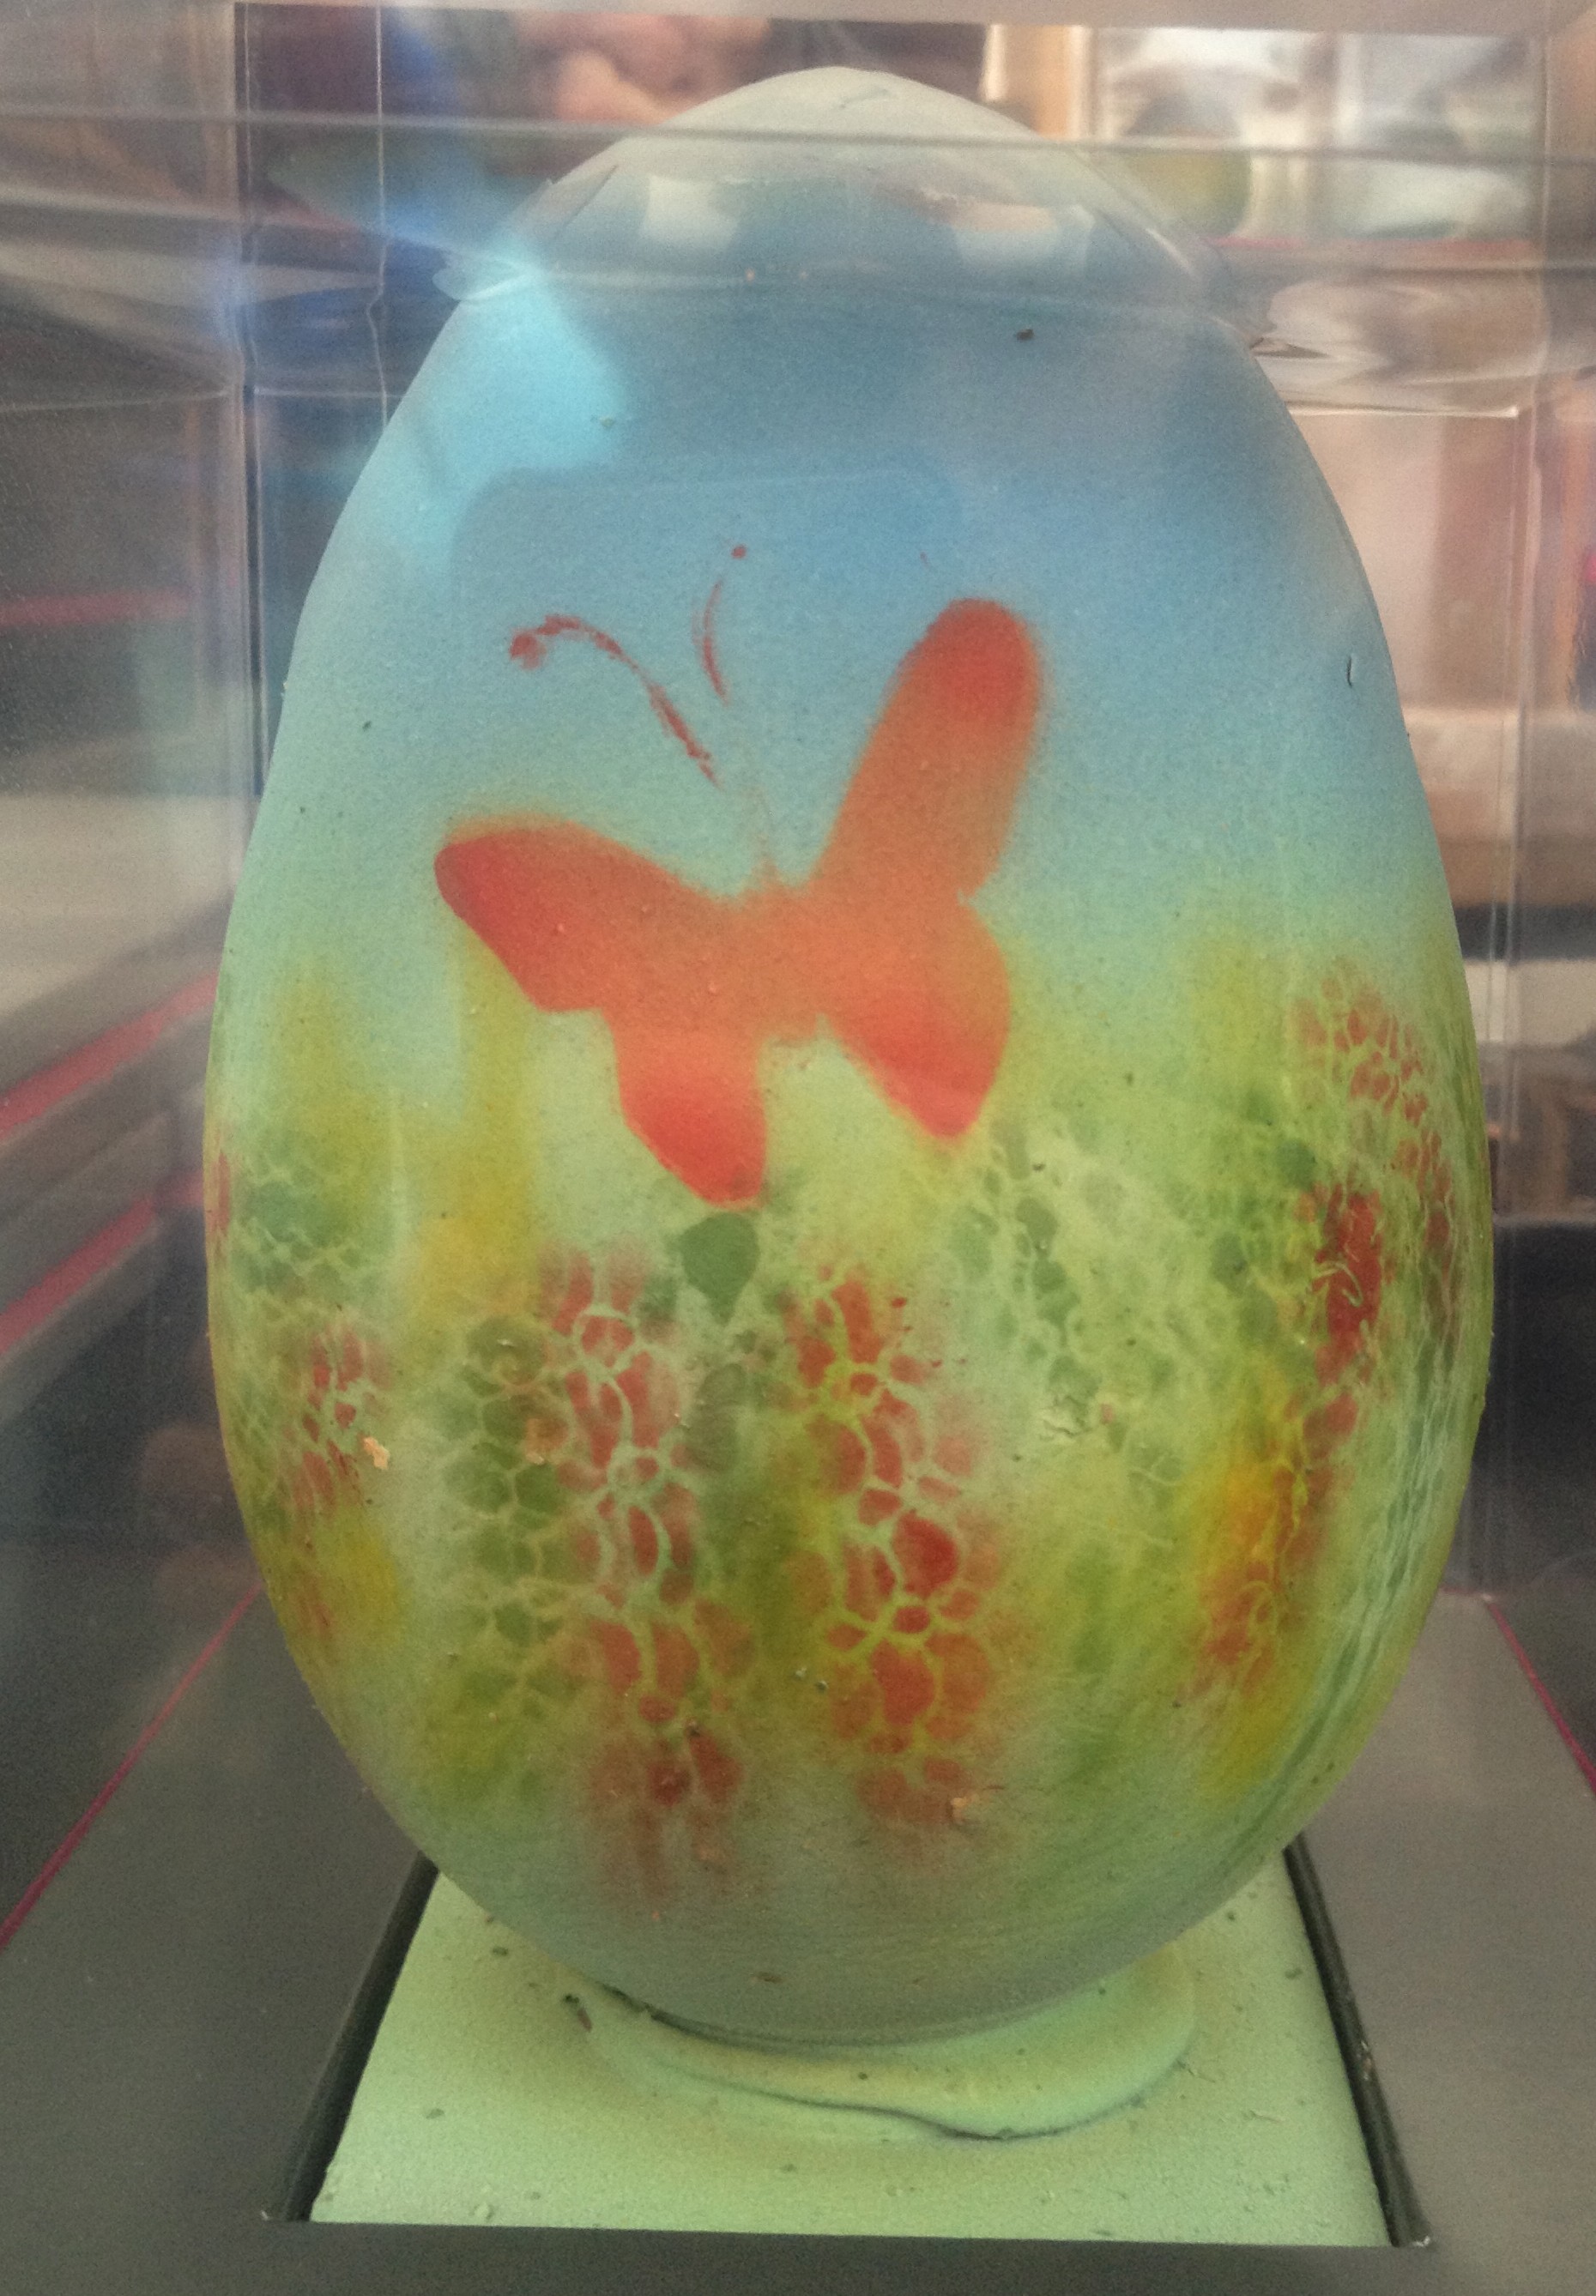 Hand-painted chocolate egg at the Chocolate Festival in London